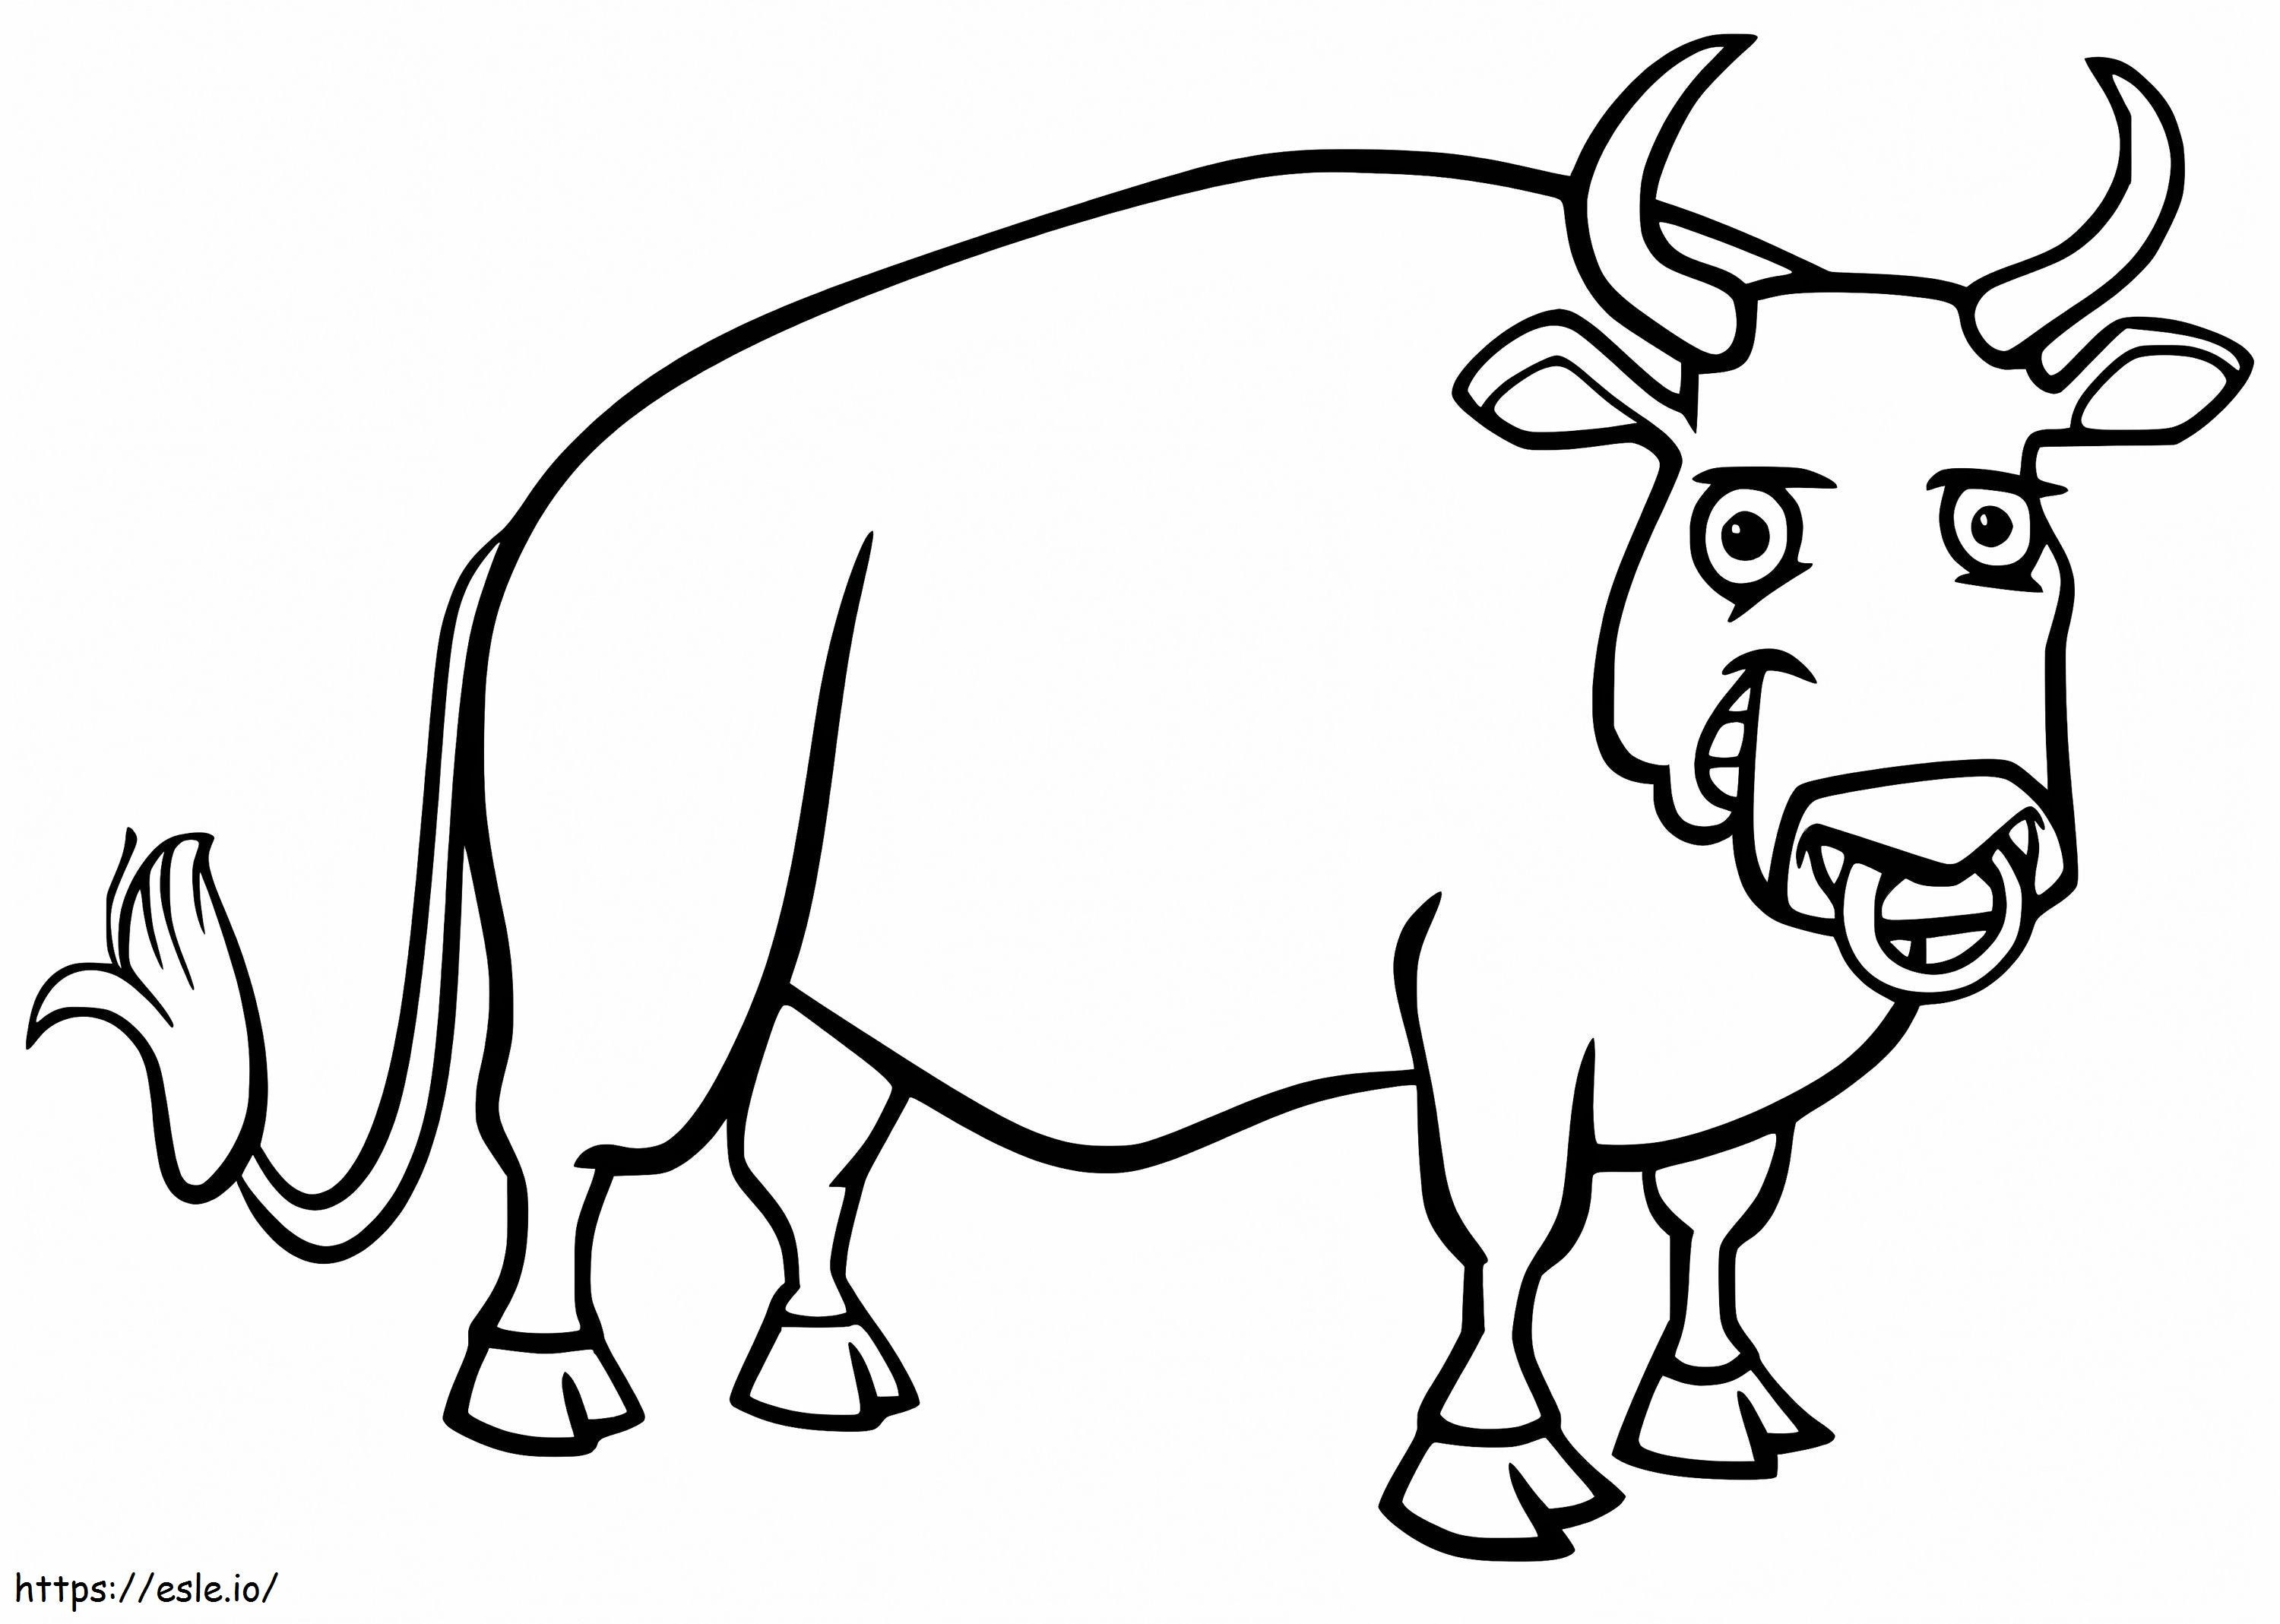 Bull Smiling coloring page